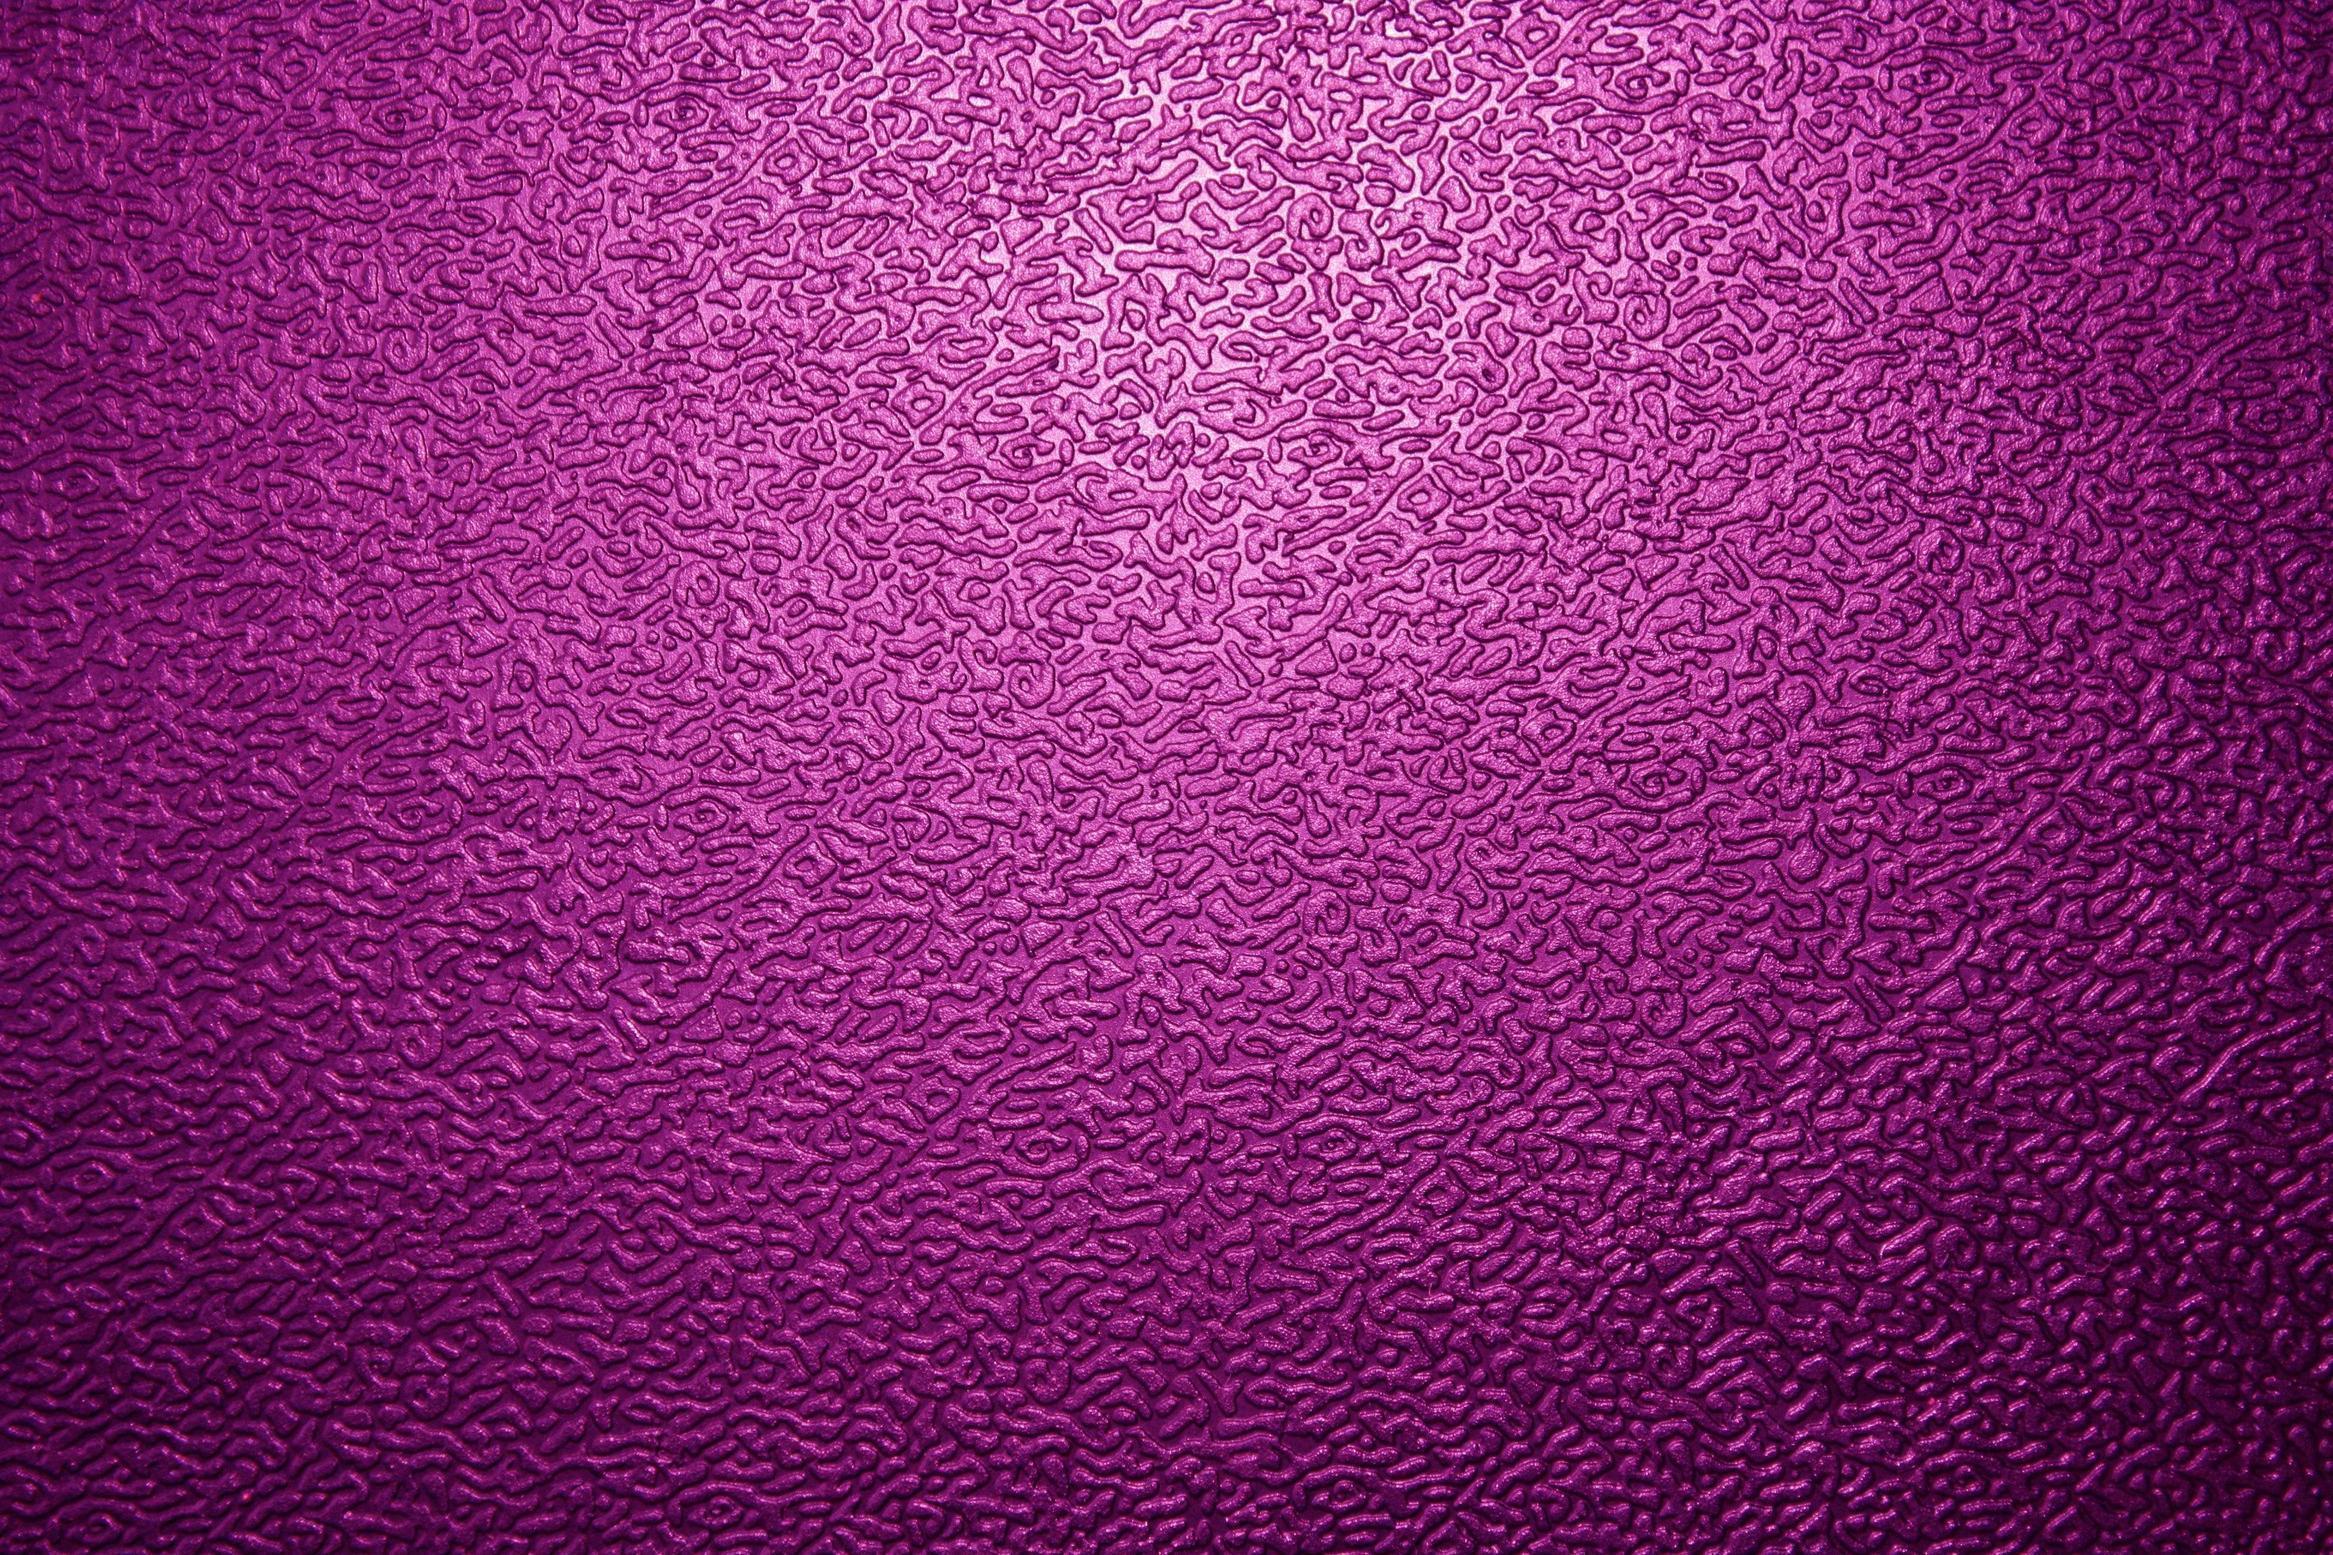 Textured Magenta Plastic Close Up Picture. Free Photograph. Photo